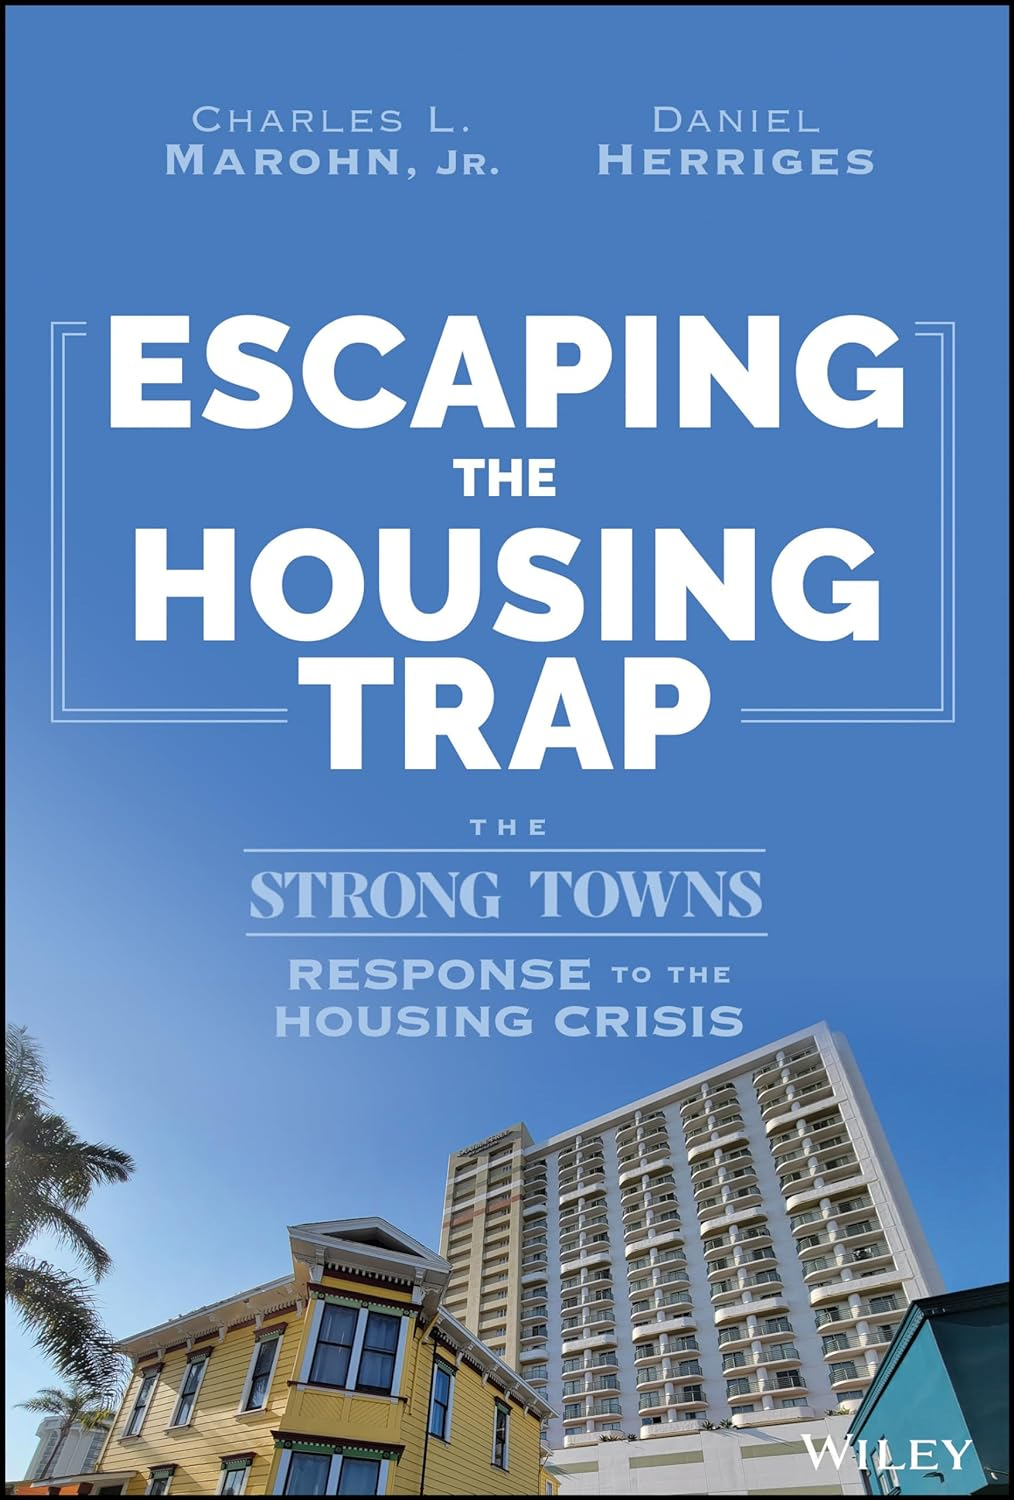 Escaping the Housing Trap: The Strong Towns Response to the Housing Crisis  by Charles L. Marohn Jr. | Goodreads